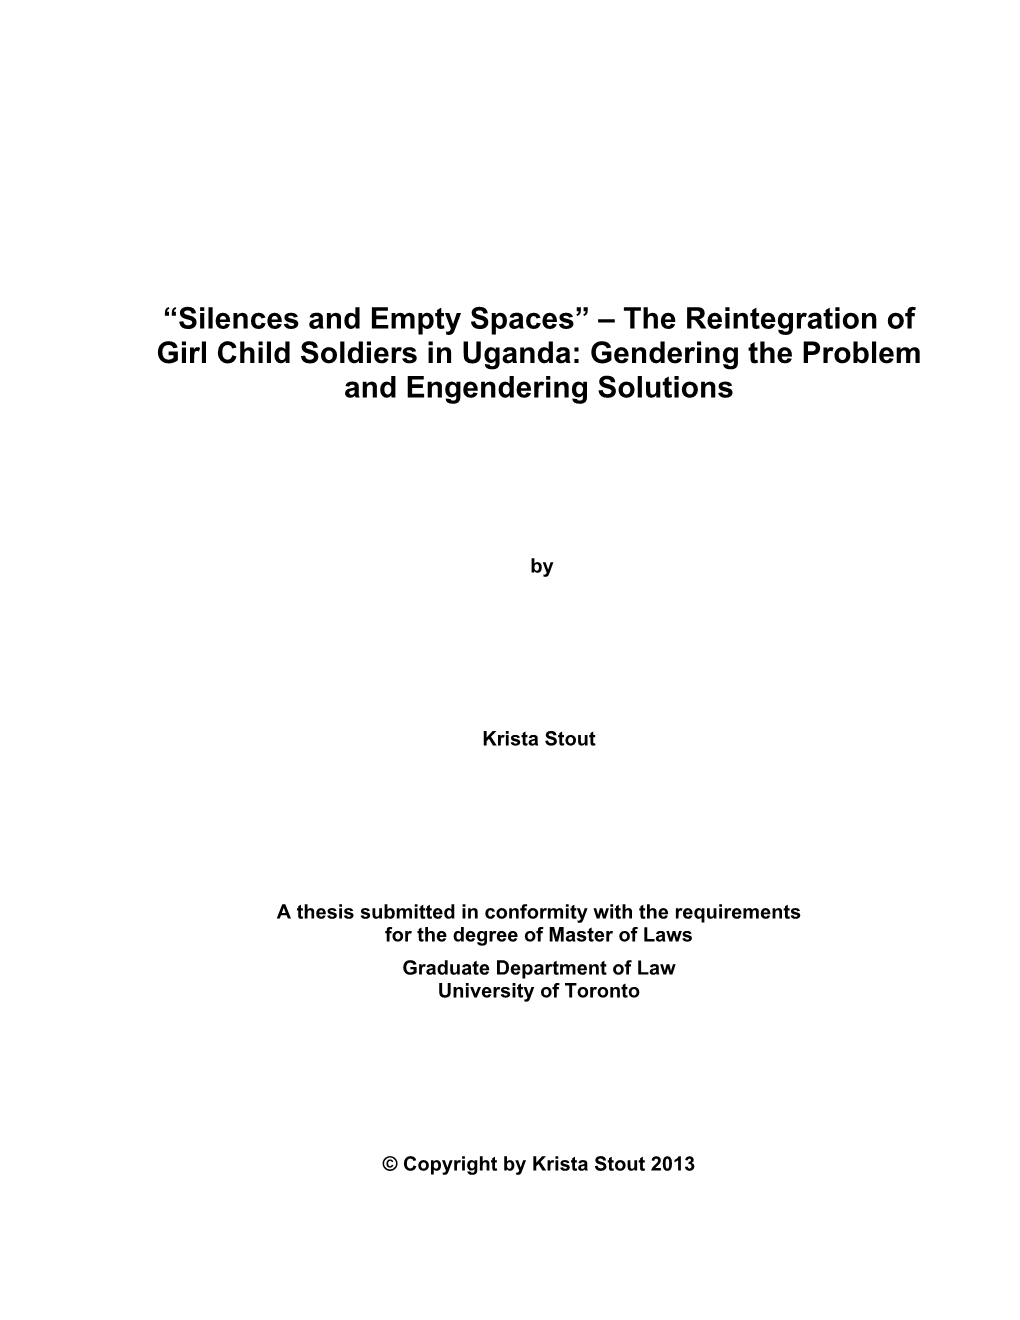 The Reintegration of Girl Child Soldiers in Uganda: Gendering the Problem and Engendering Solutions